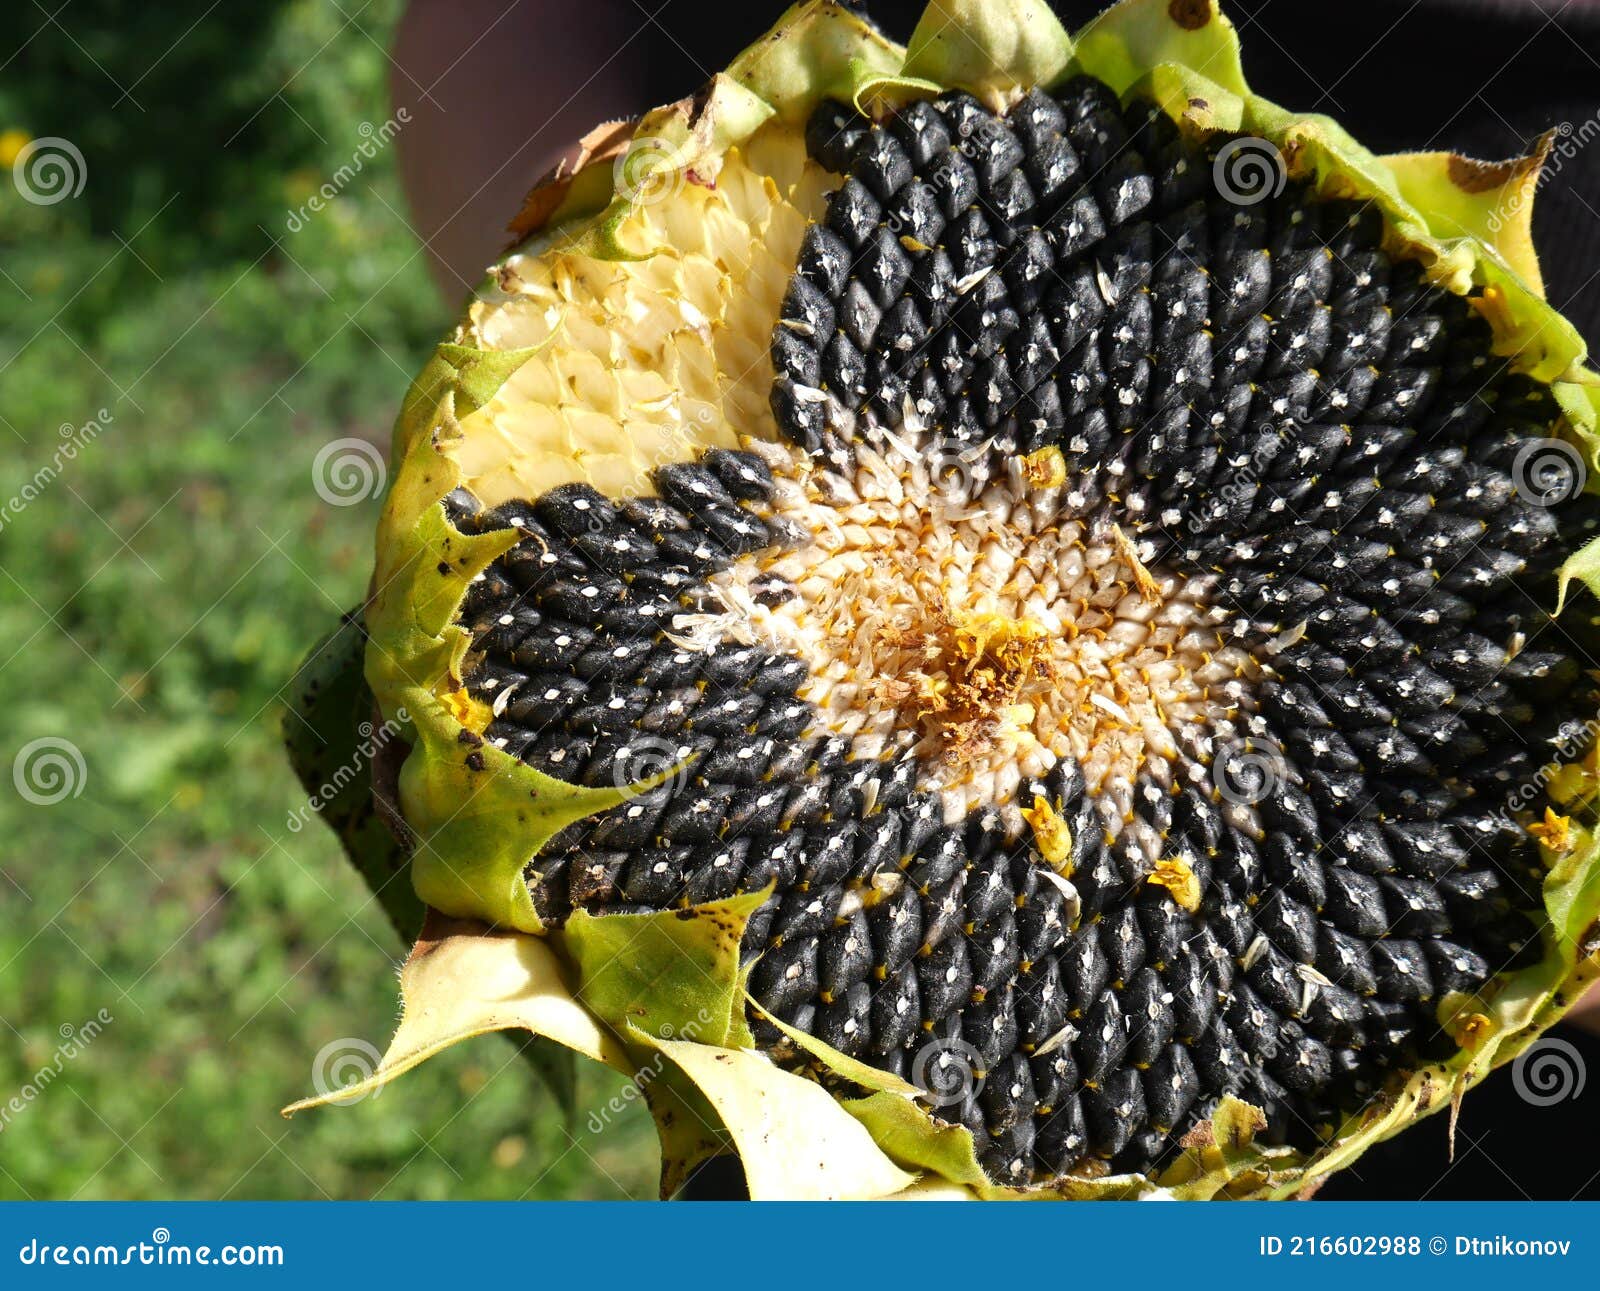 Sunflower with Seeds Inside. End of Summer Stock Photo - Image of ...